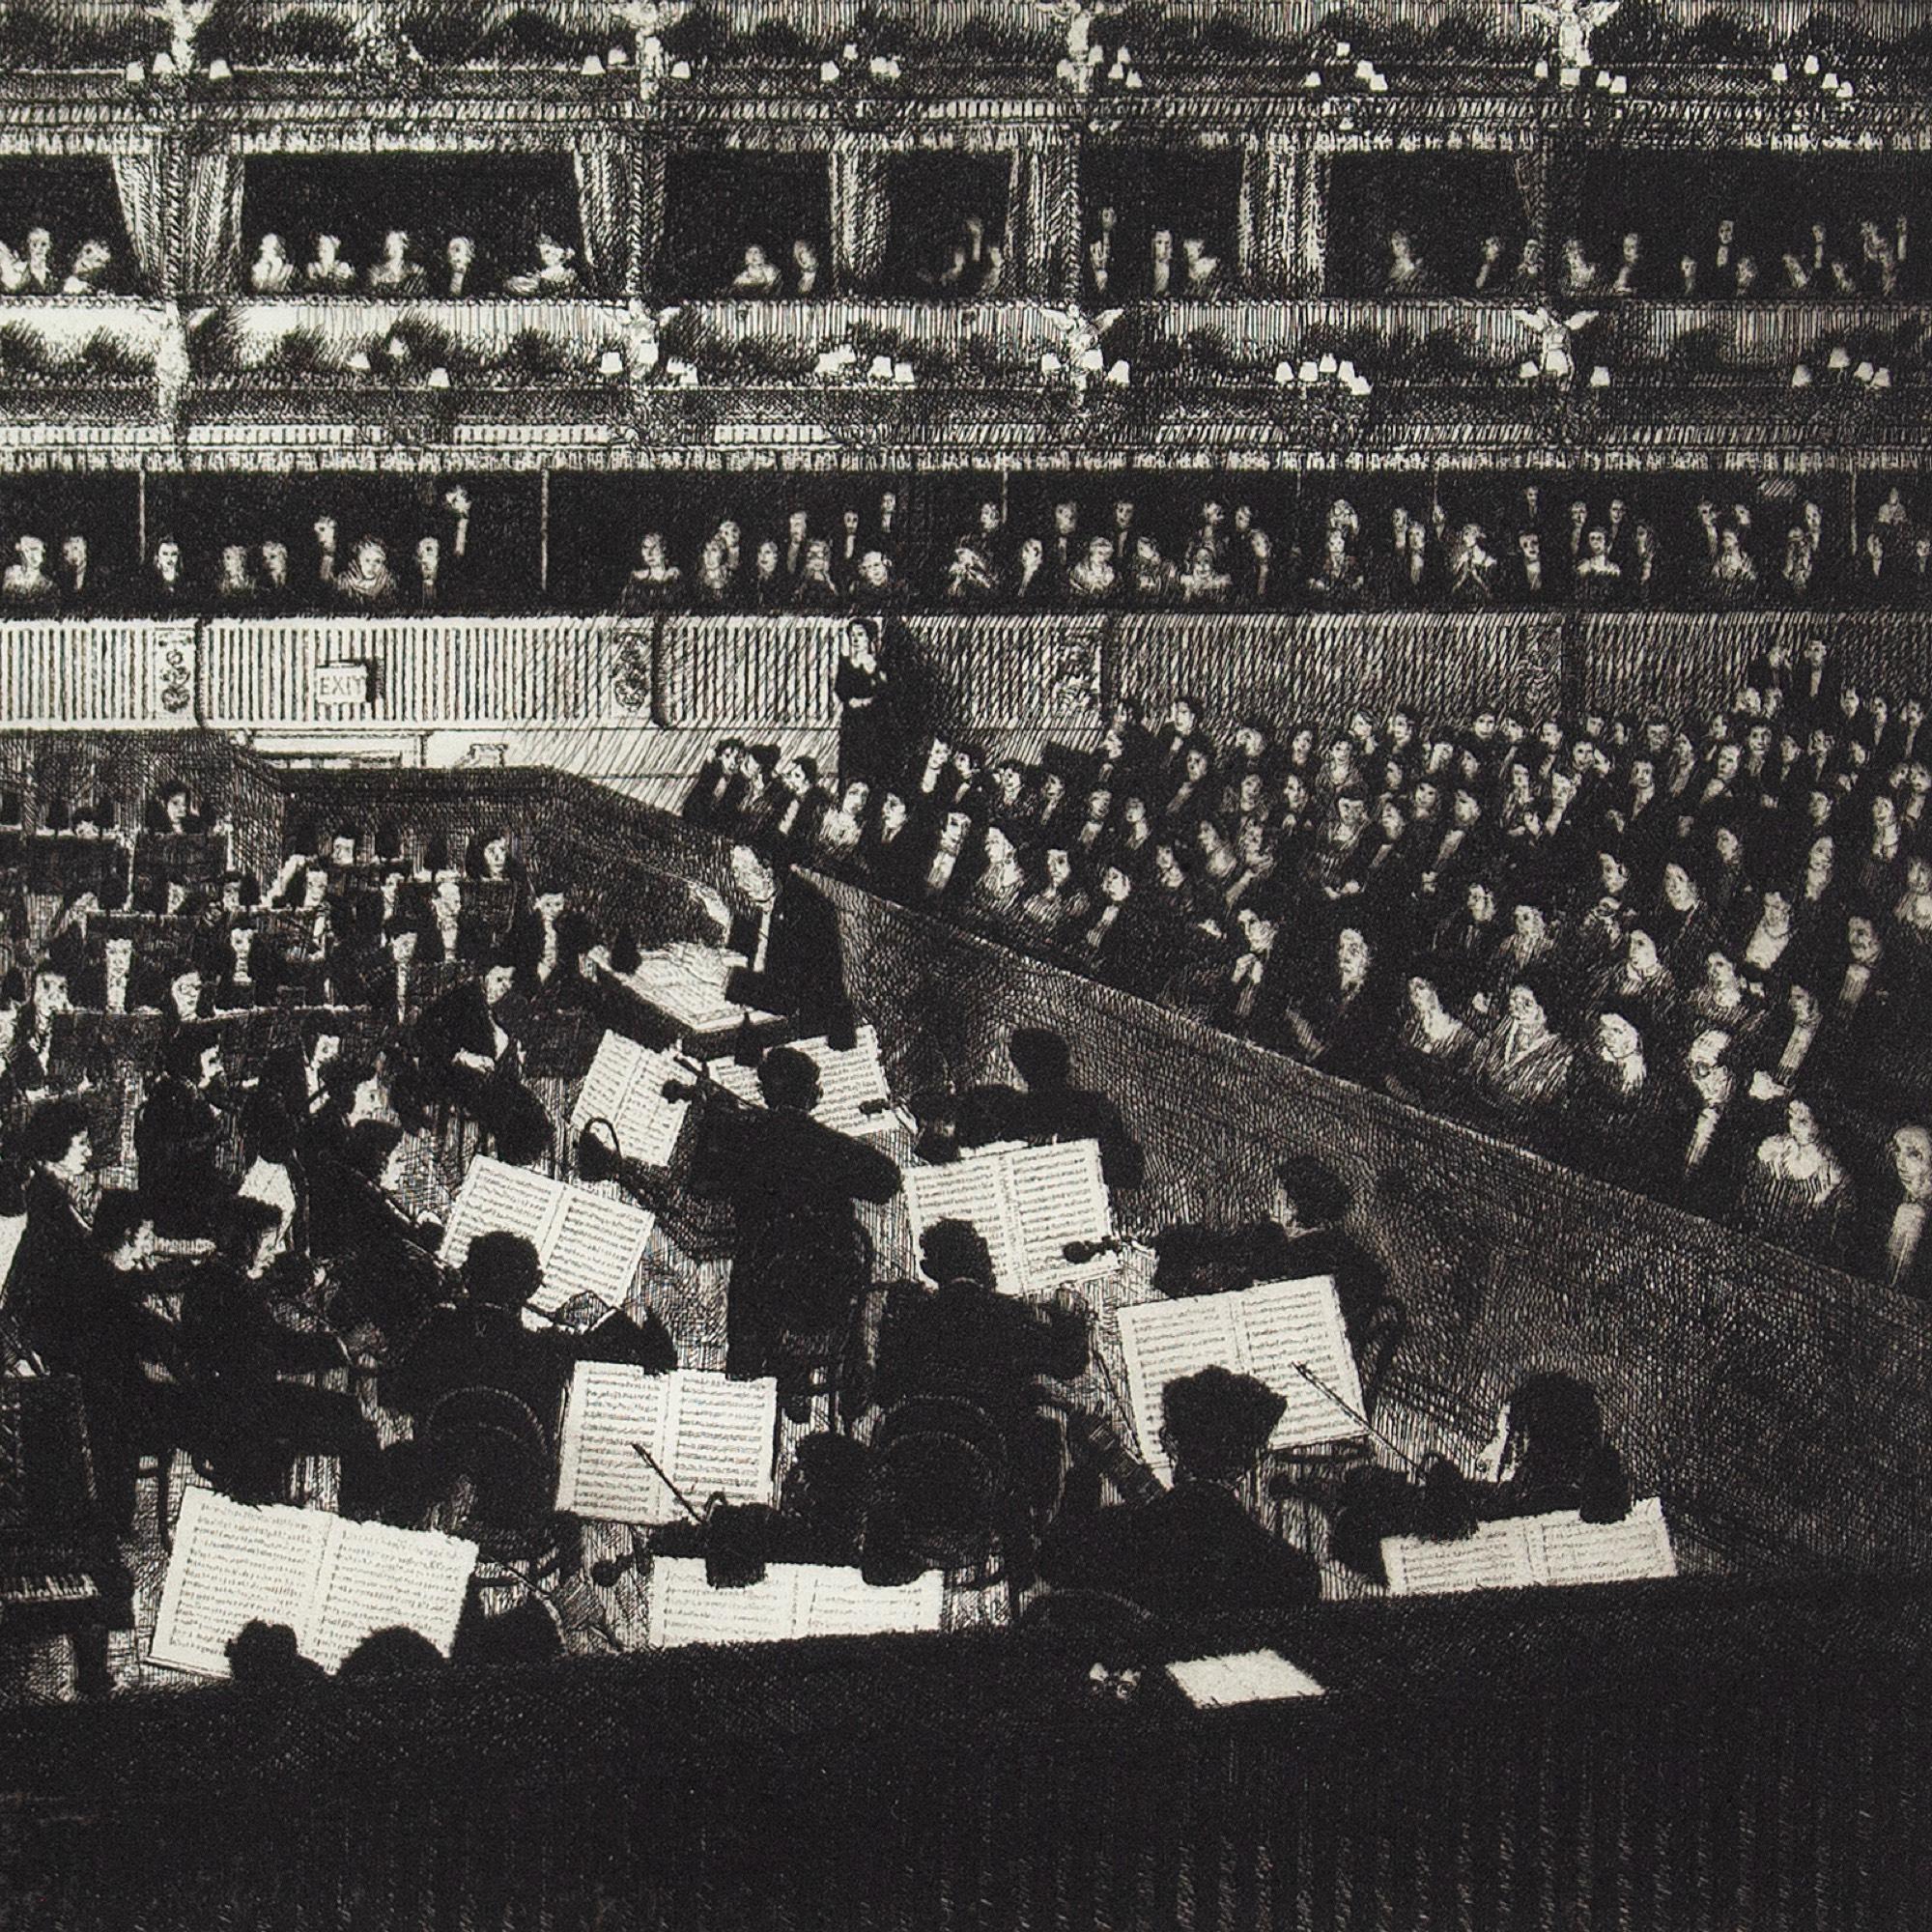 Wilfred Fairclough, Orchestra At The Royal Opera House, Etching 2